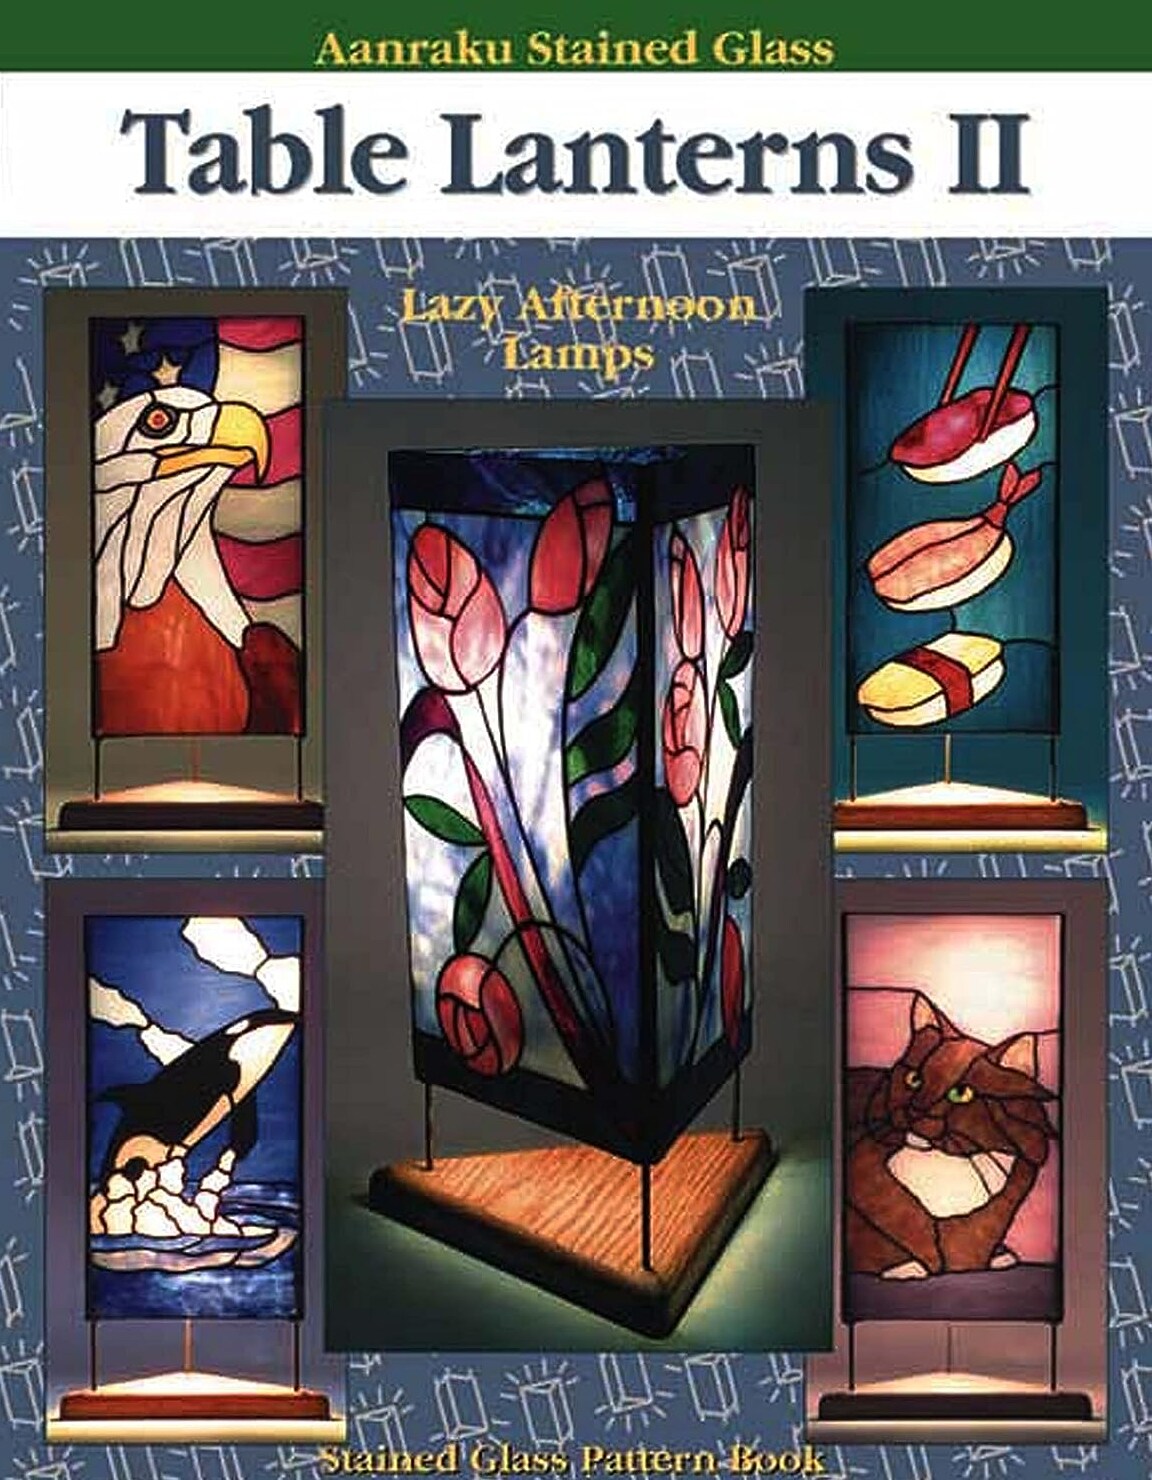 Stained Glass Pattern Book: Table Lanterns II